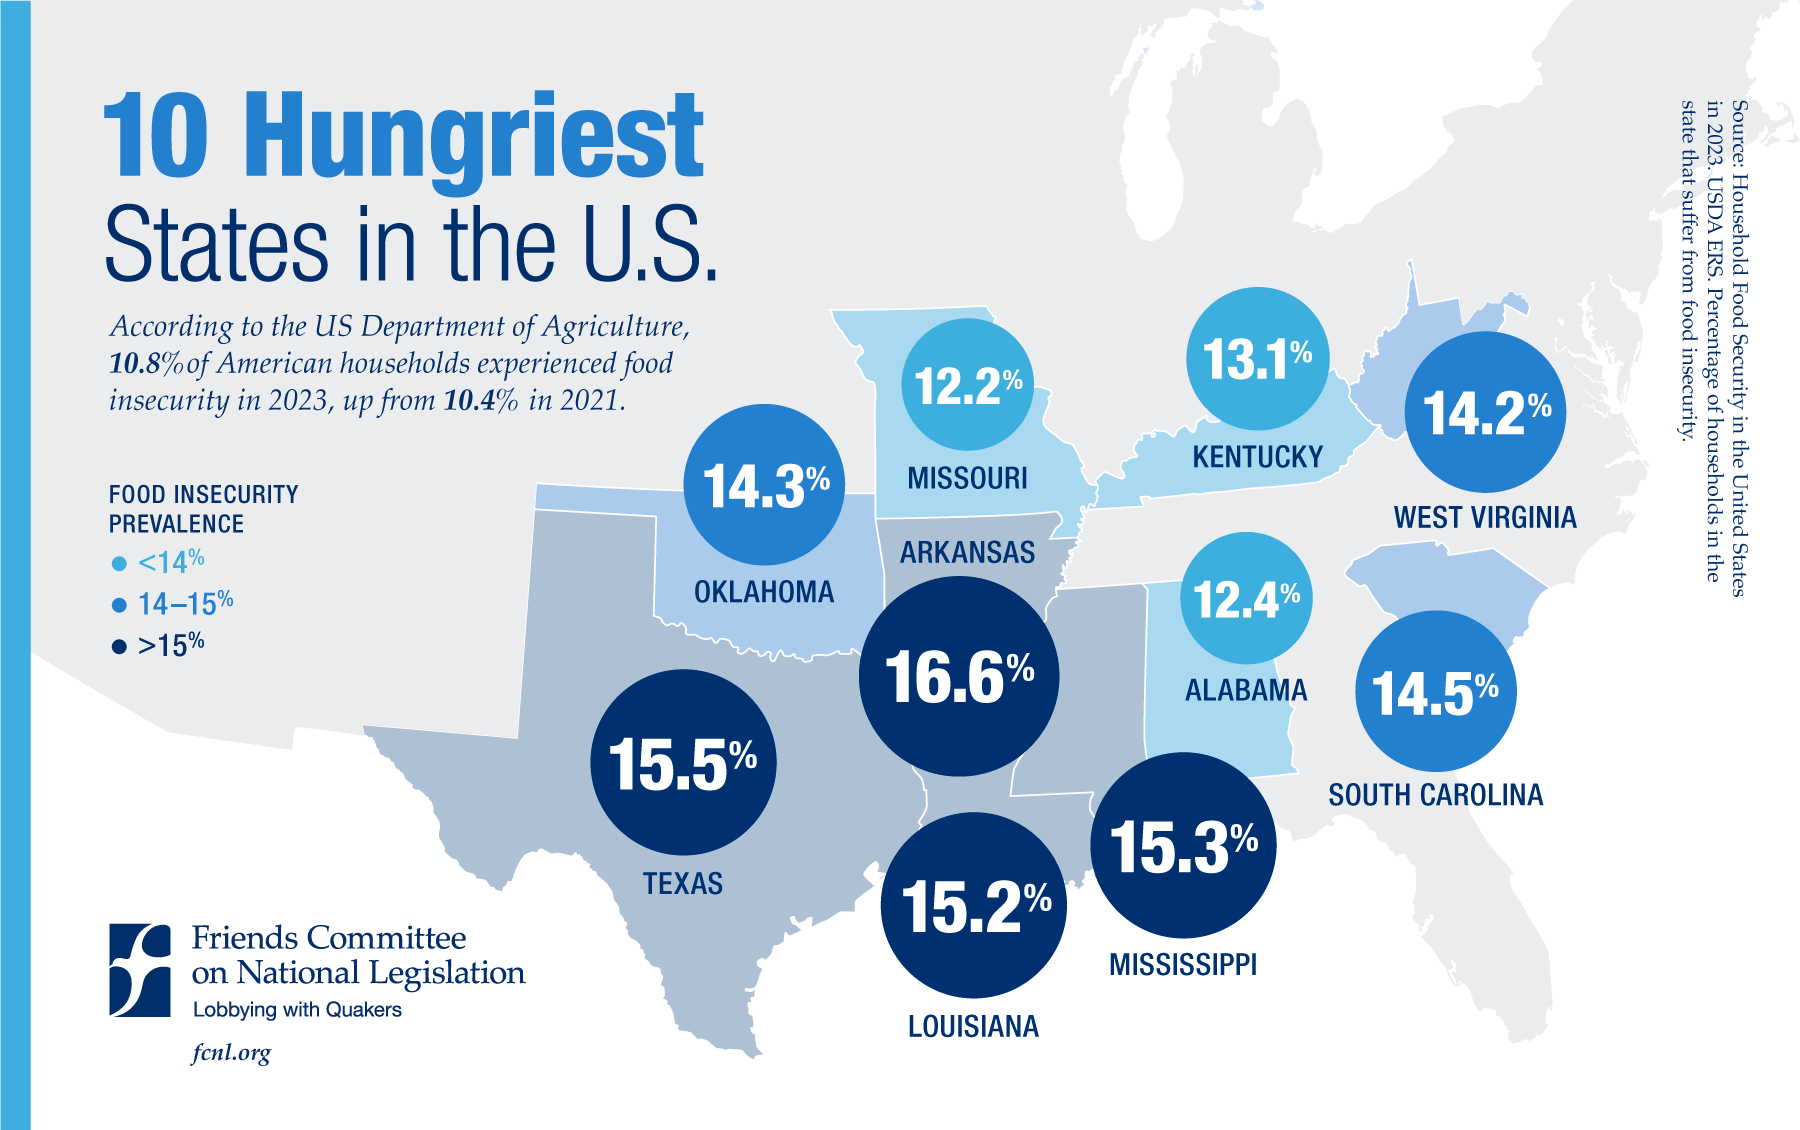 10 Hungriest States in the U.S.